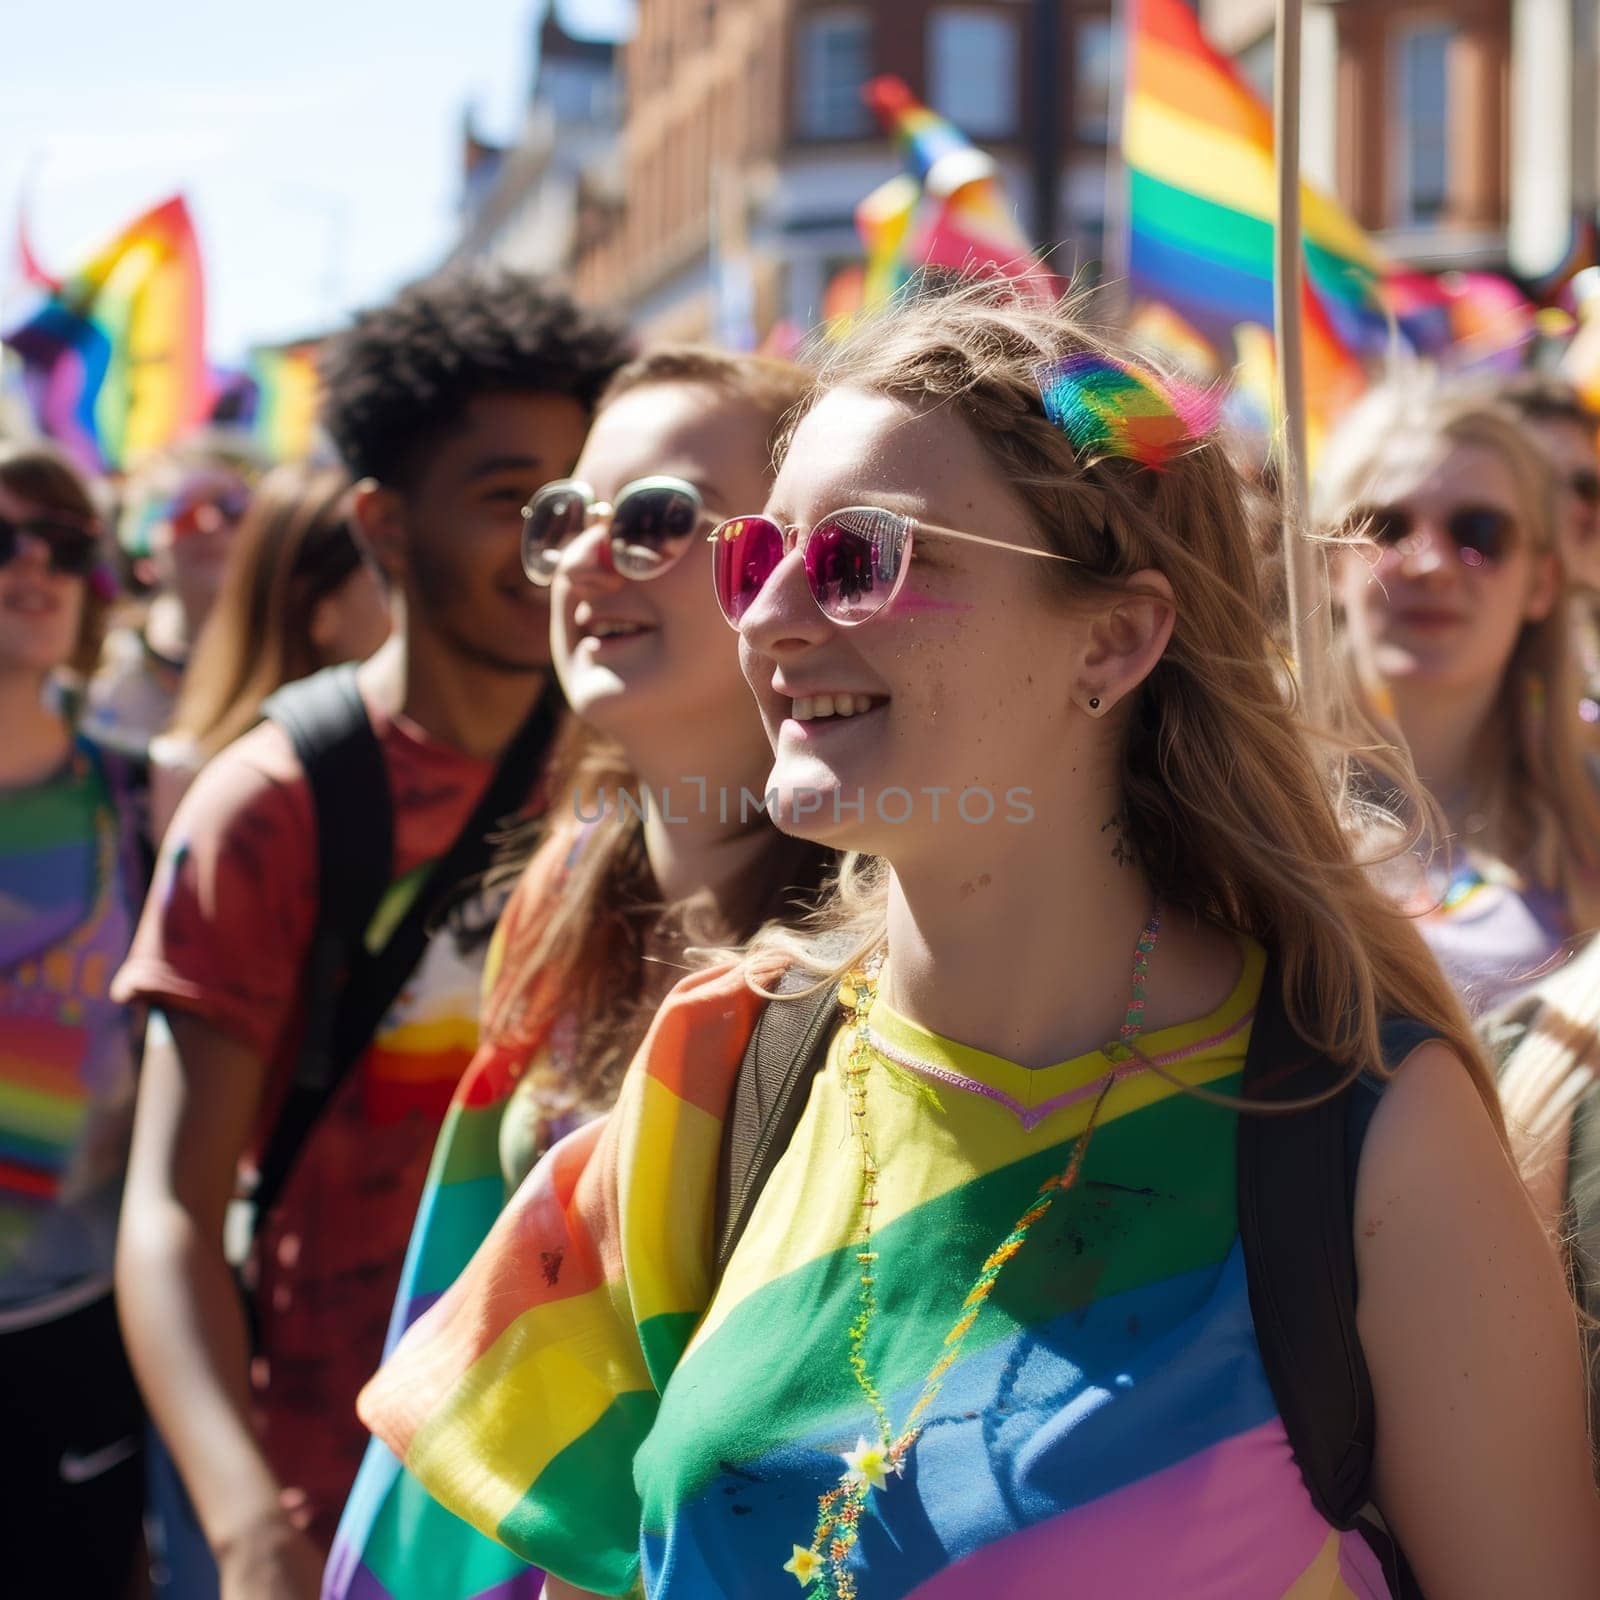 Joyous participants wearing rainbow attire, celebrating Pride with enthusiasm and colorful face paint in a sunny setting